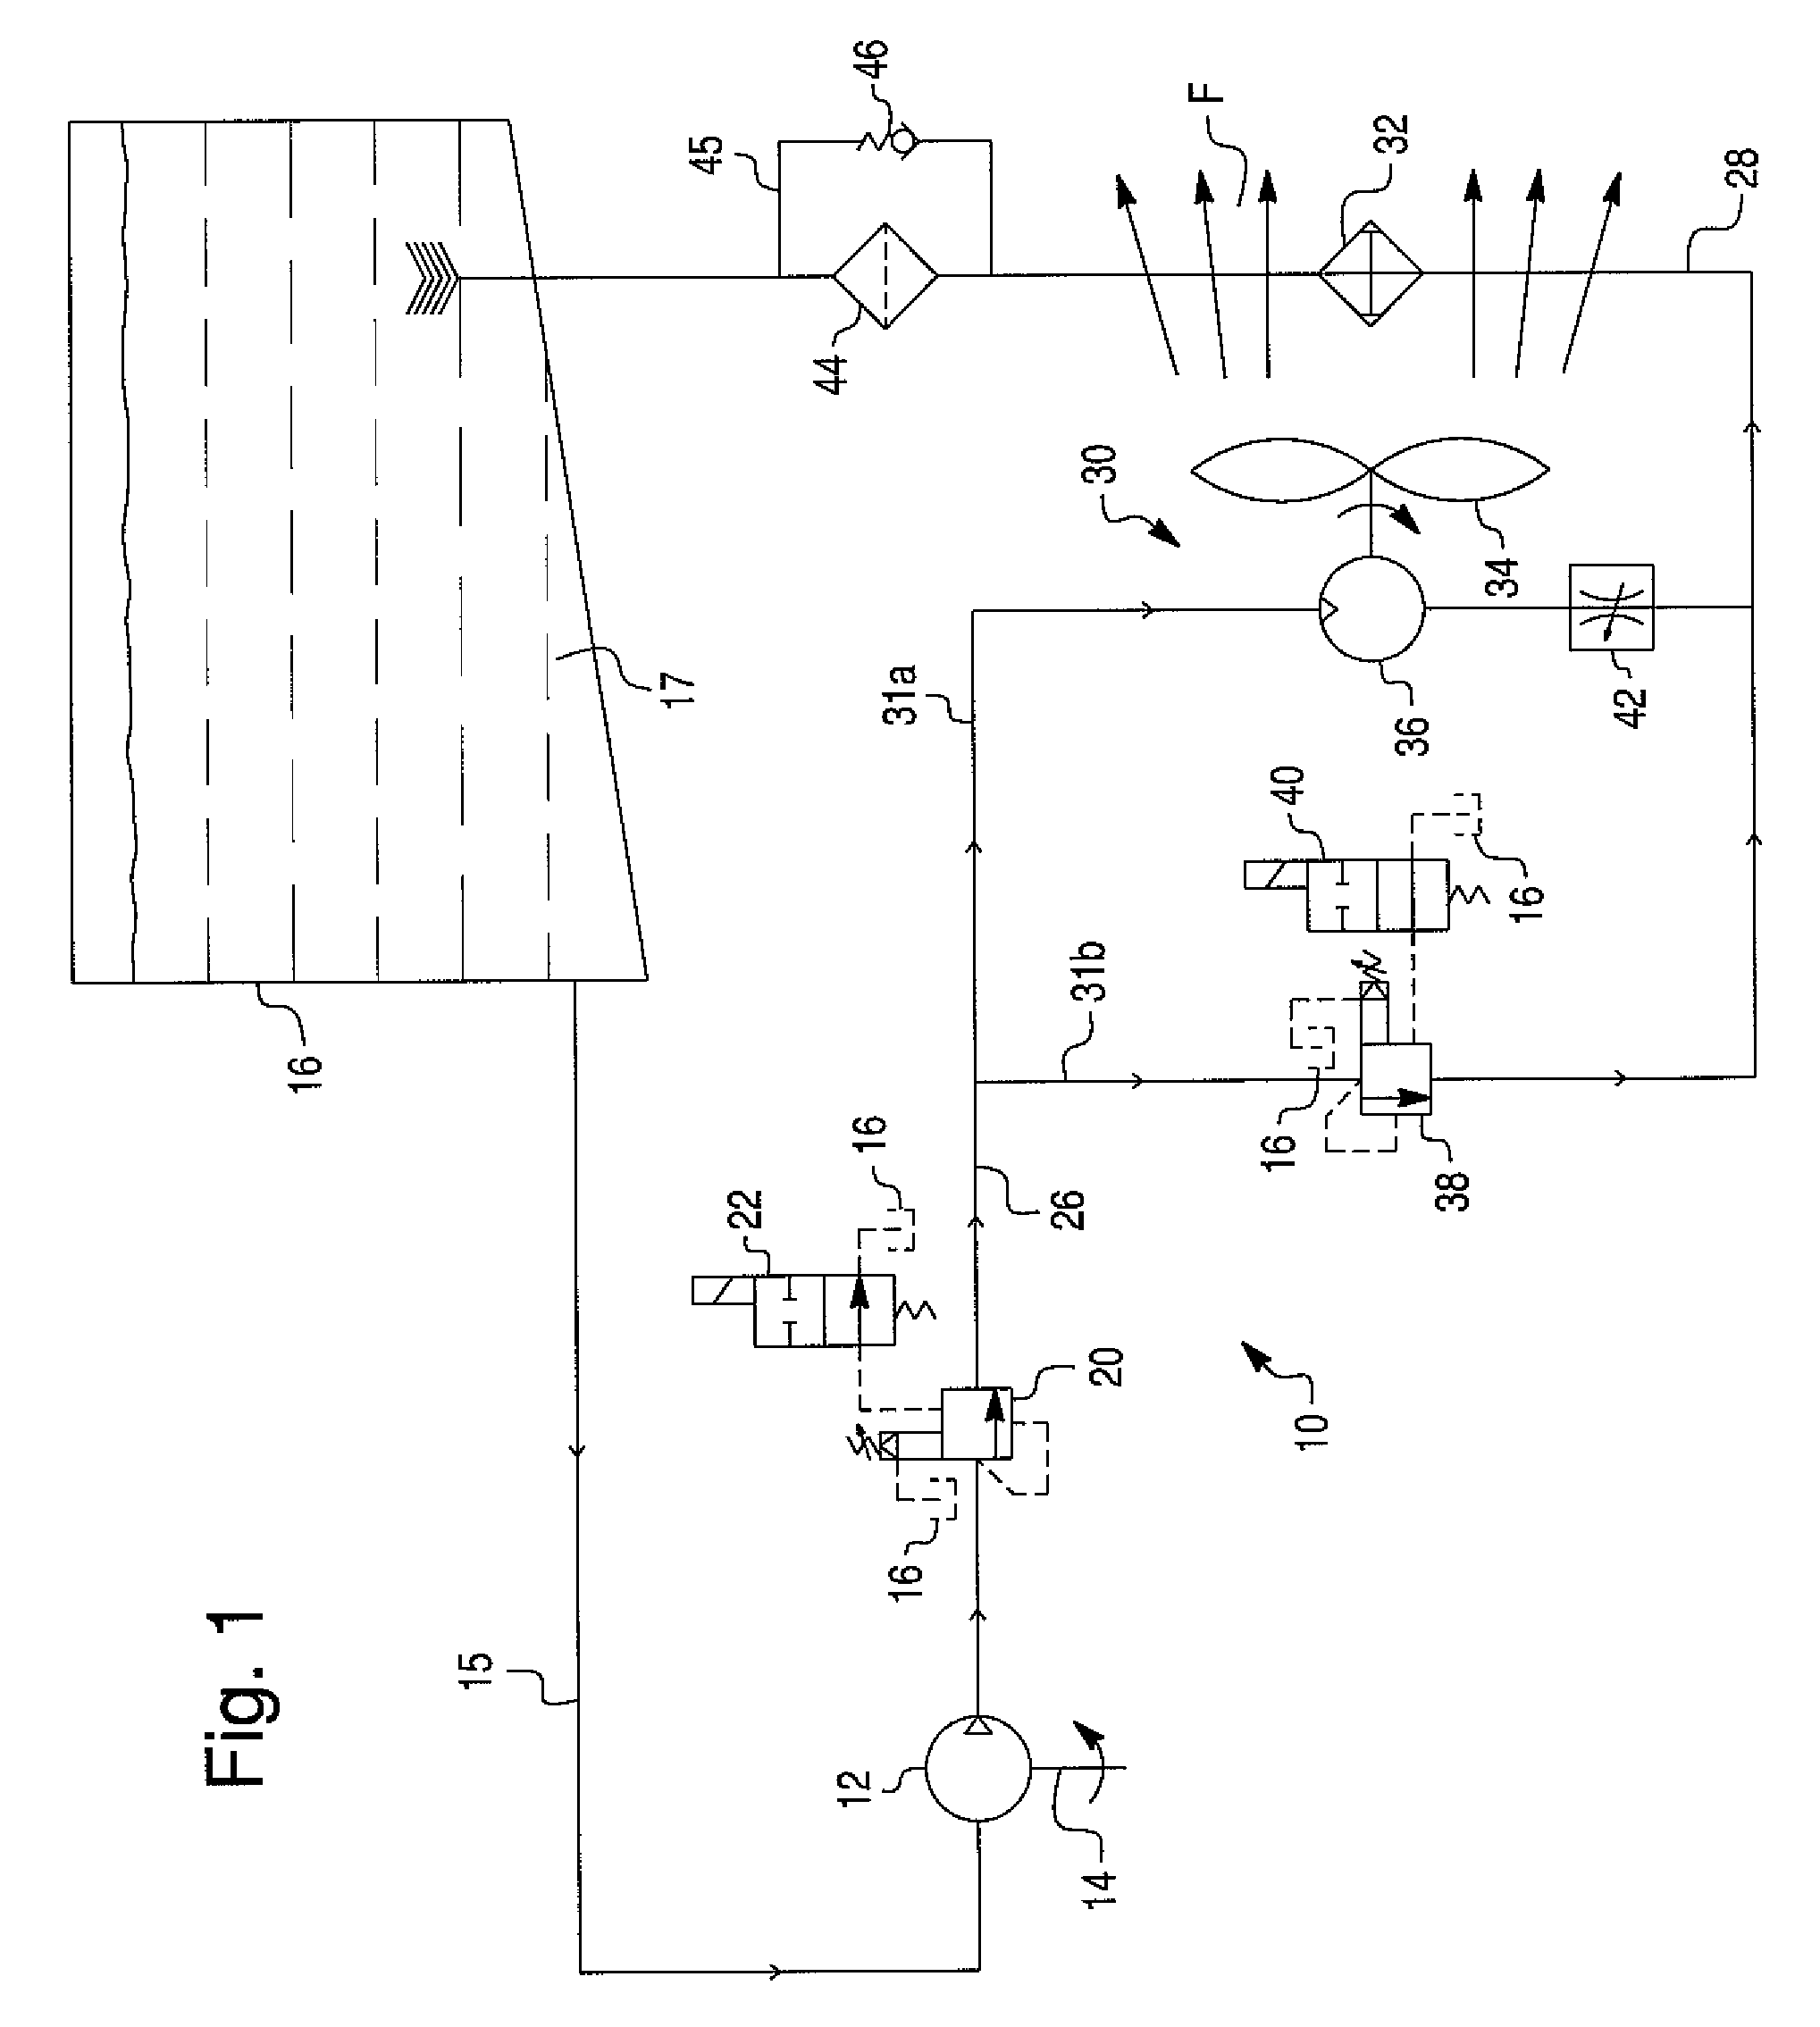 Energy conversion and dissipation system